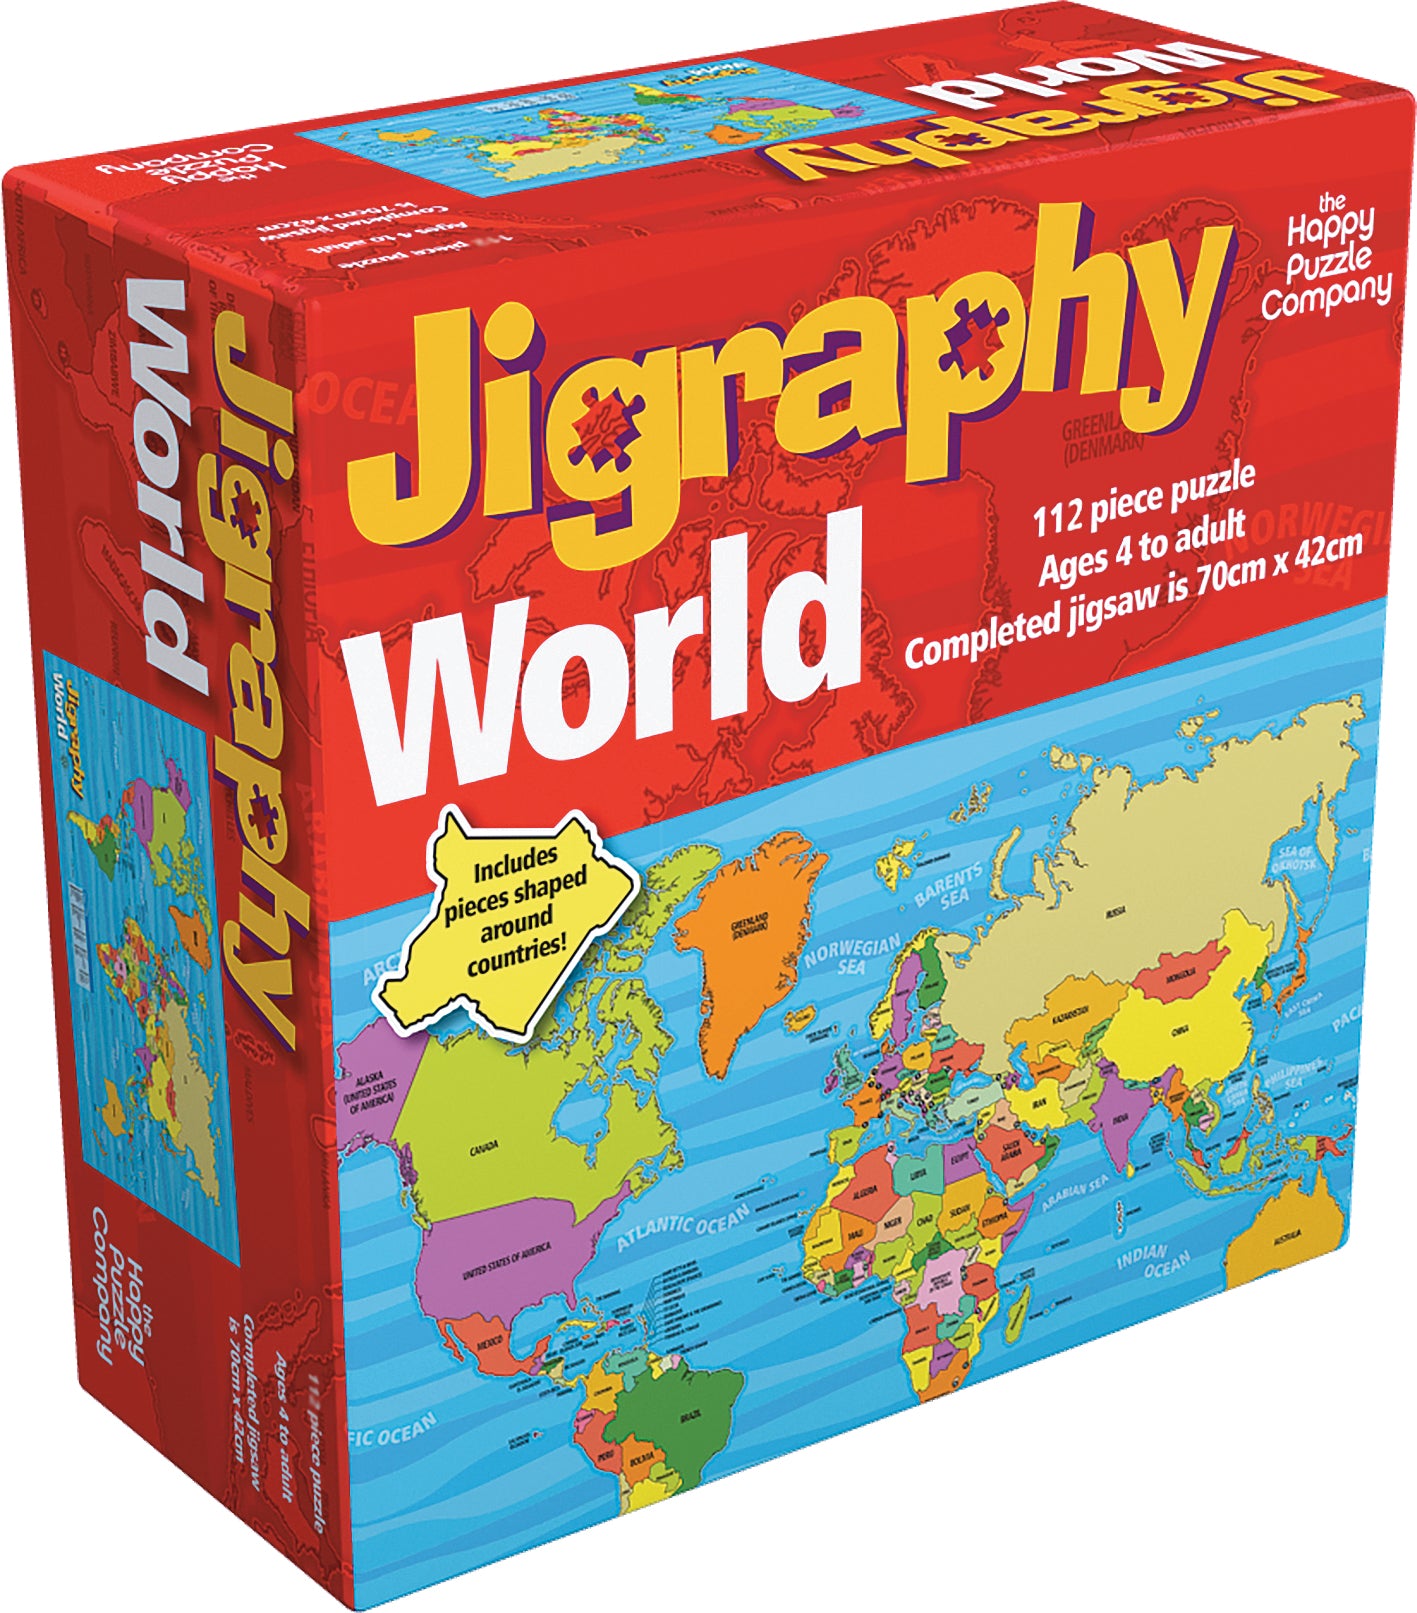 Problem solving game for children - Jigraphy world puzzle for children - Happy Puzzle company toys